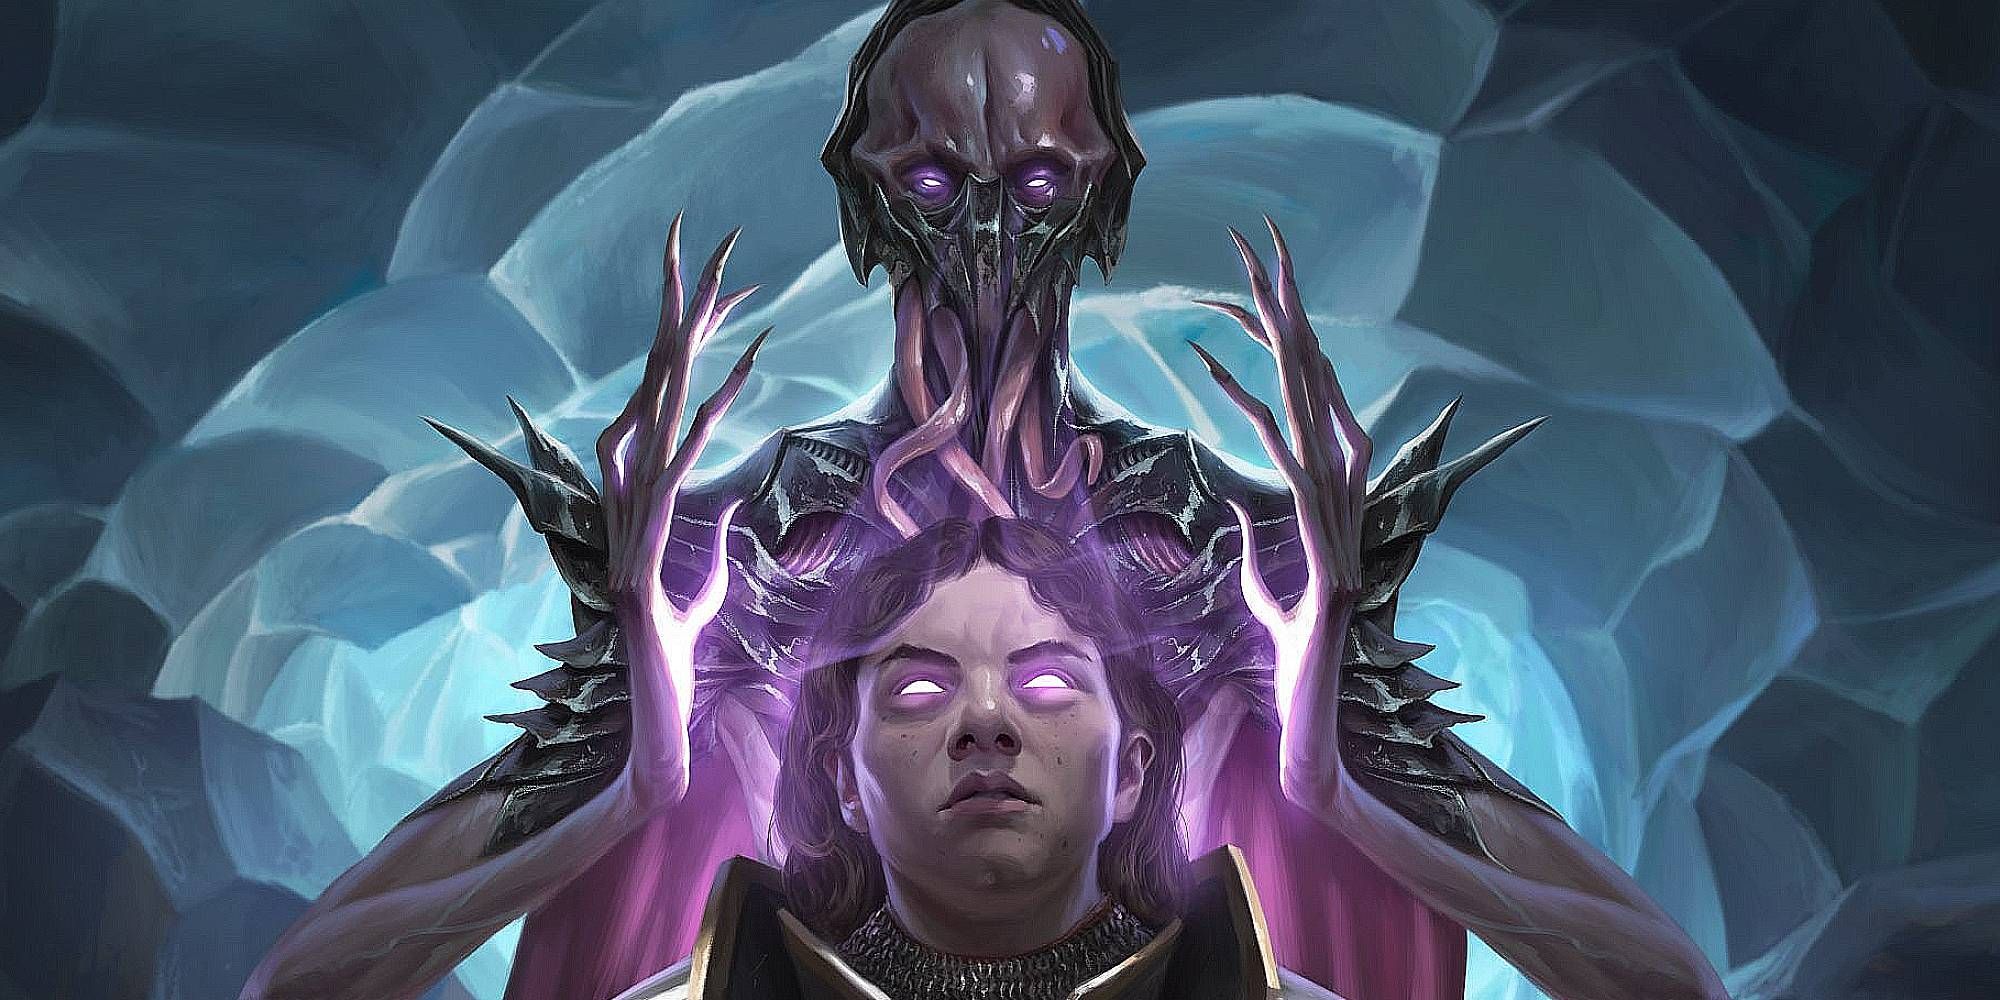 A Mind Flayer stands behind a figure whose eyes are glowing